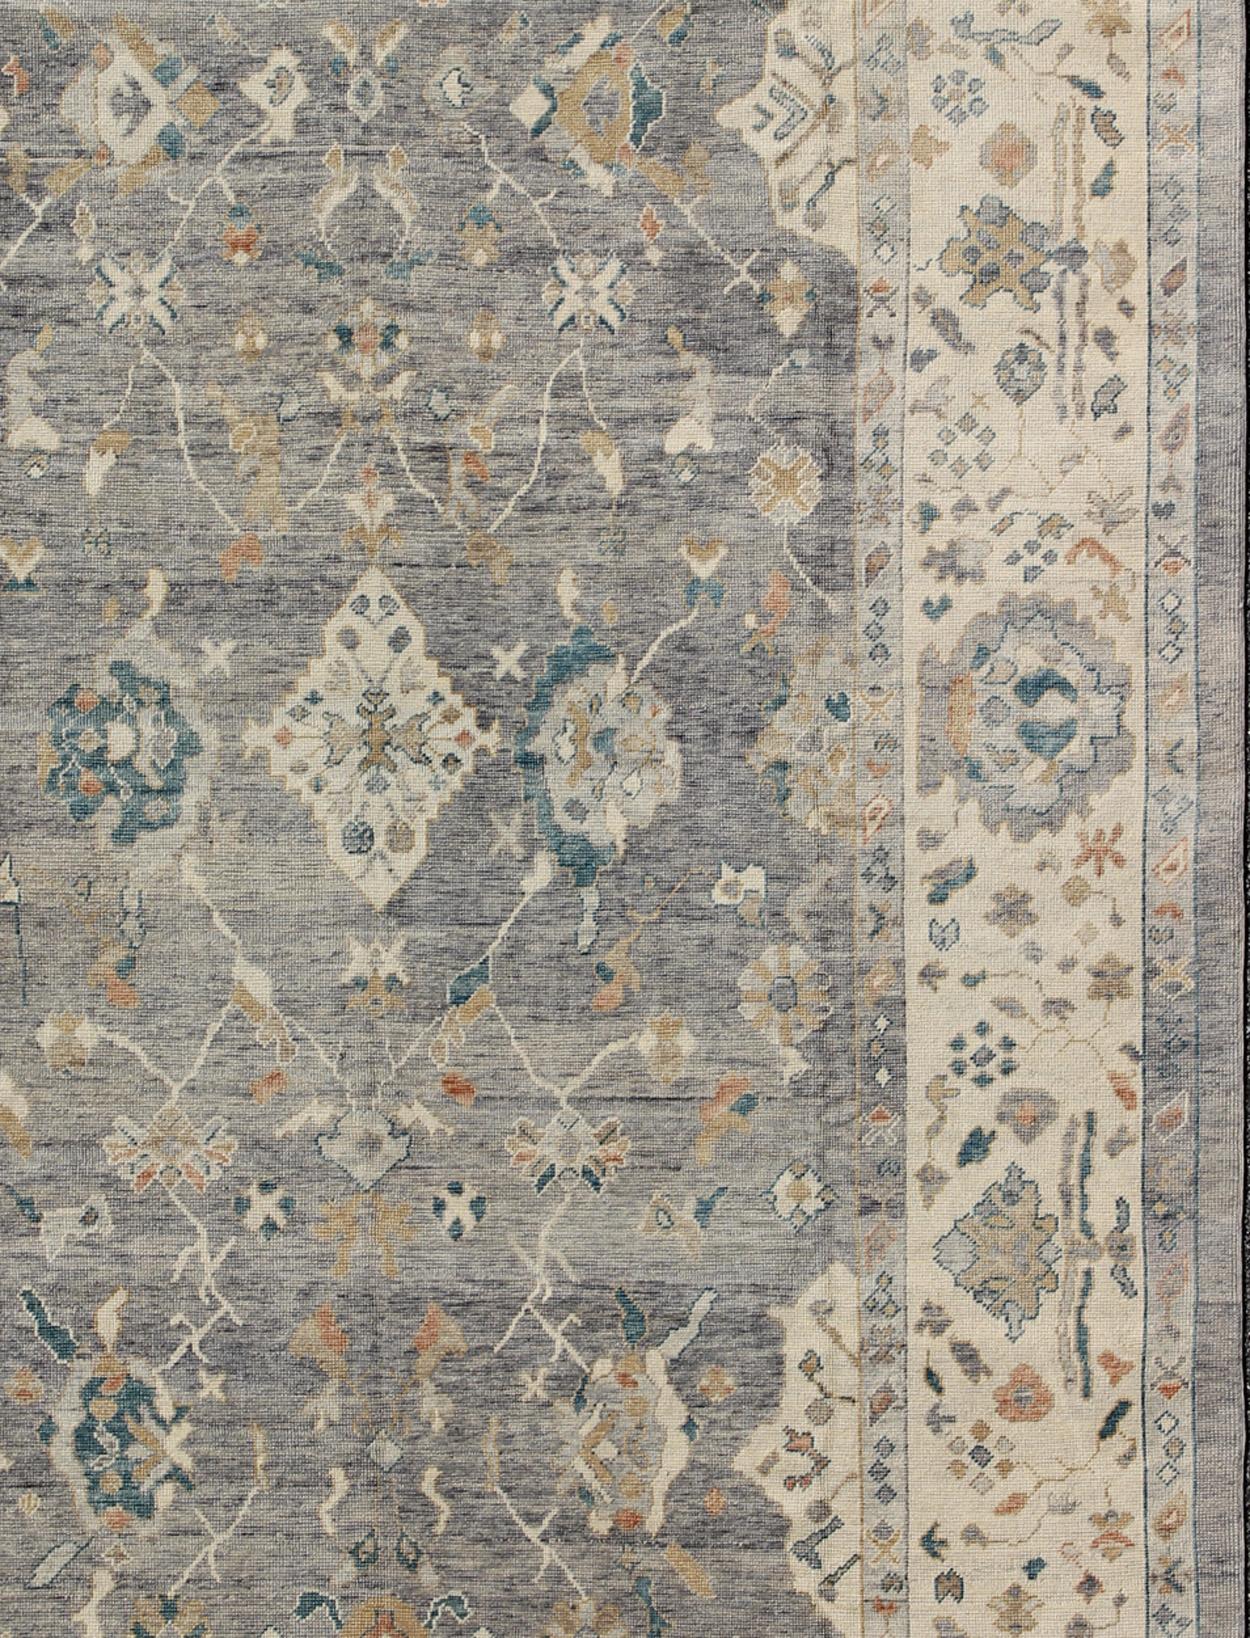 Measures: 10'3 x 14'3.
Turkish Oushak rug with bold design and color palette and all-over diamond medallion design. Tribal Design Turkish Oushak Rug with Gray and Multi Colors by Keivan Woven Arts / rug MSD-200, country of origin / type: Turkey /